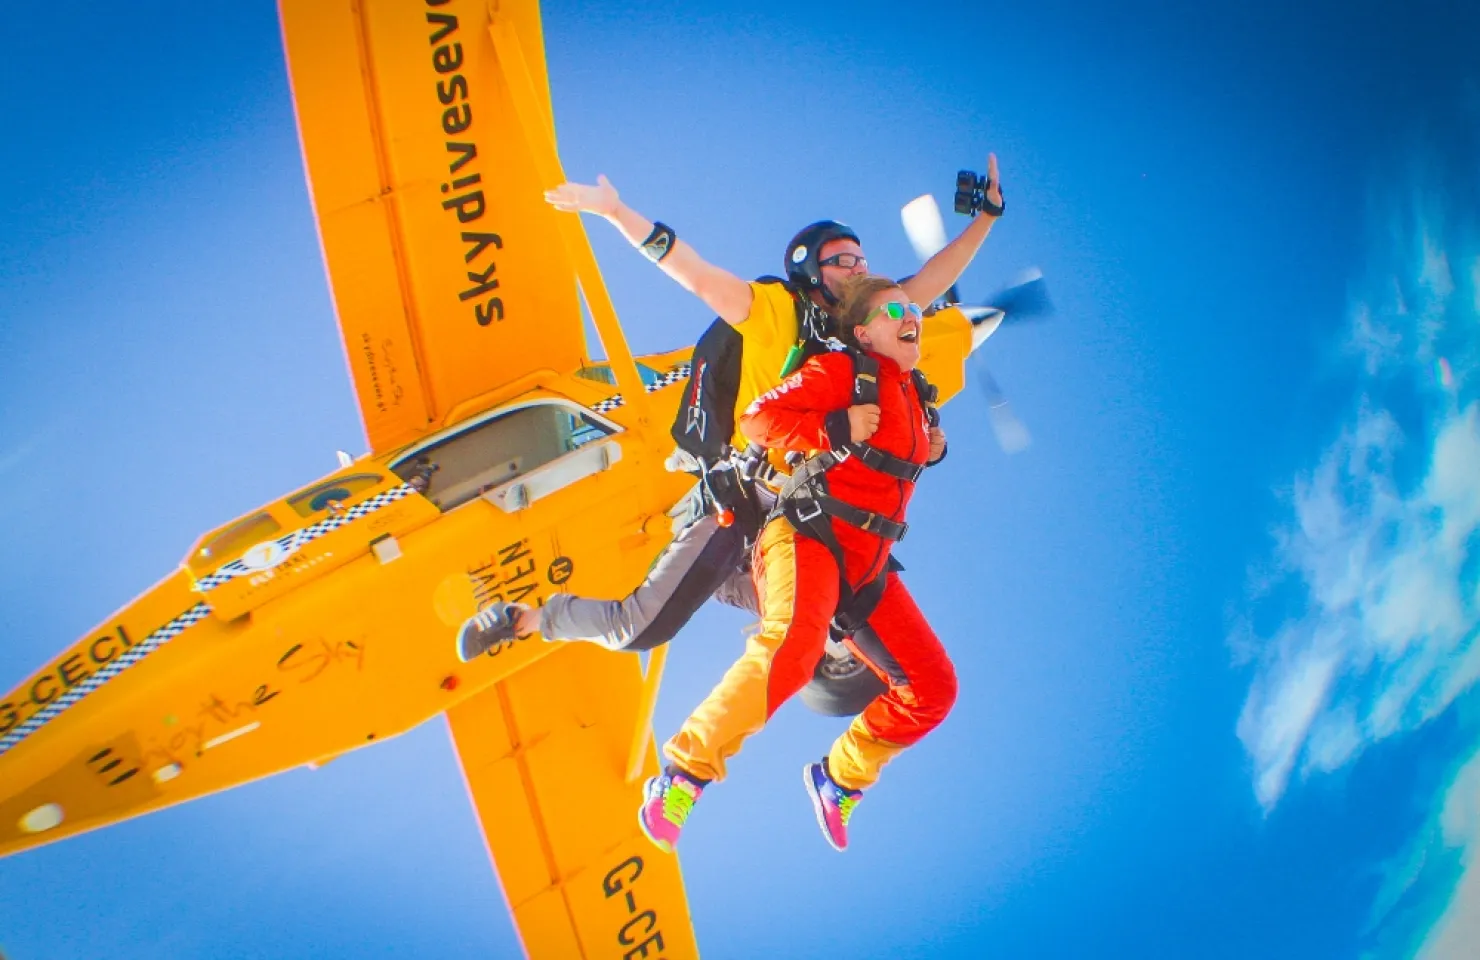 Algarve Skydiving Centre - Alvor Activities and things to do